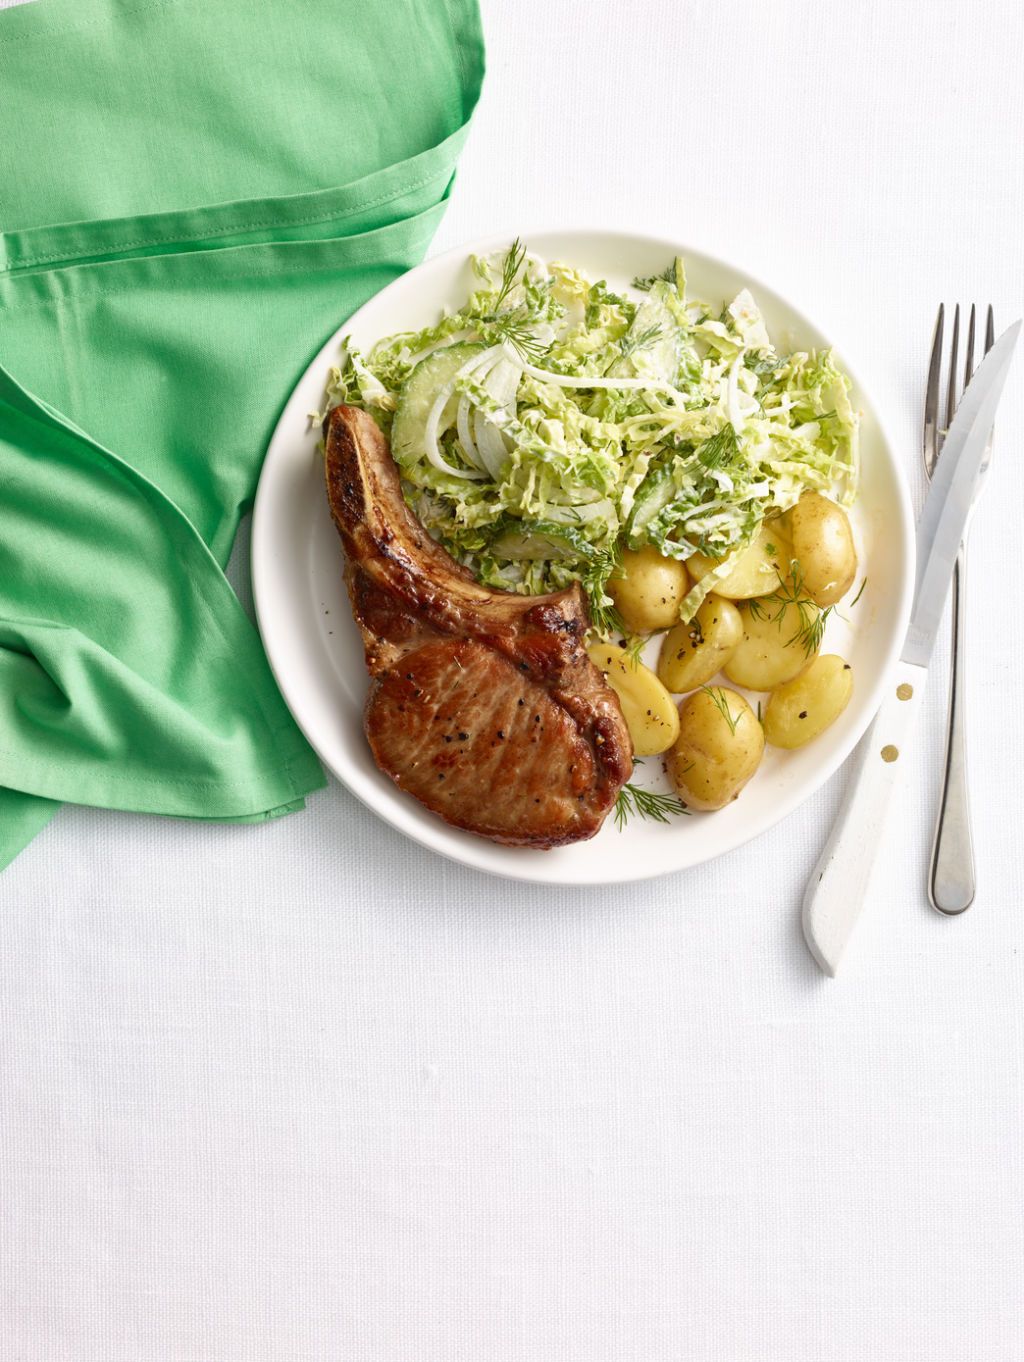 <p>Love your leftovers!  For a hearty sandwich, slice any extra pork chops and pile it on bread along with the slaw, then top with baby arugula or spinach.</p> <p><strong>Recipe:</strong> <a href="pork-chops-horseradish-cabbage-cucumber-slaw-recipe-wdy0315" target="_blank"><strong>Pork Chops with Horseradish Cabbage and Cucumber Slaw</strong></a></p>